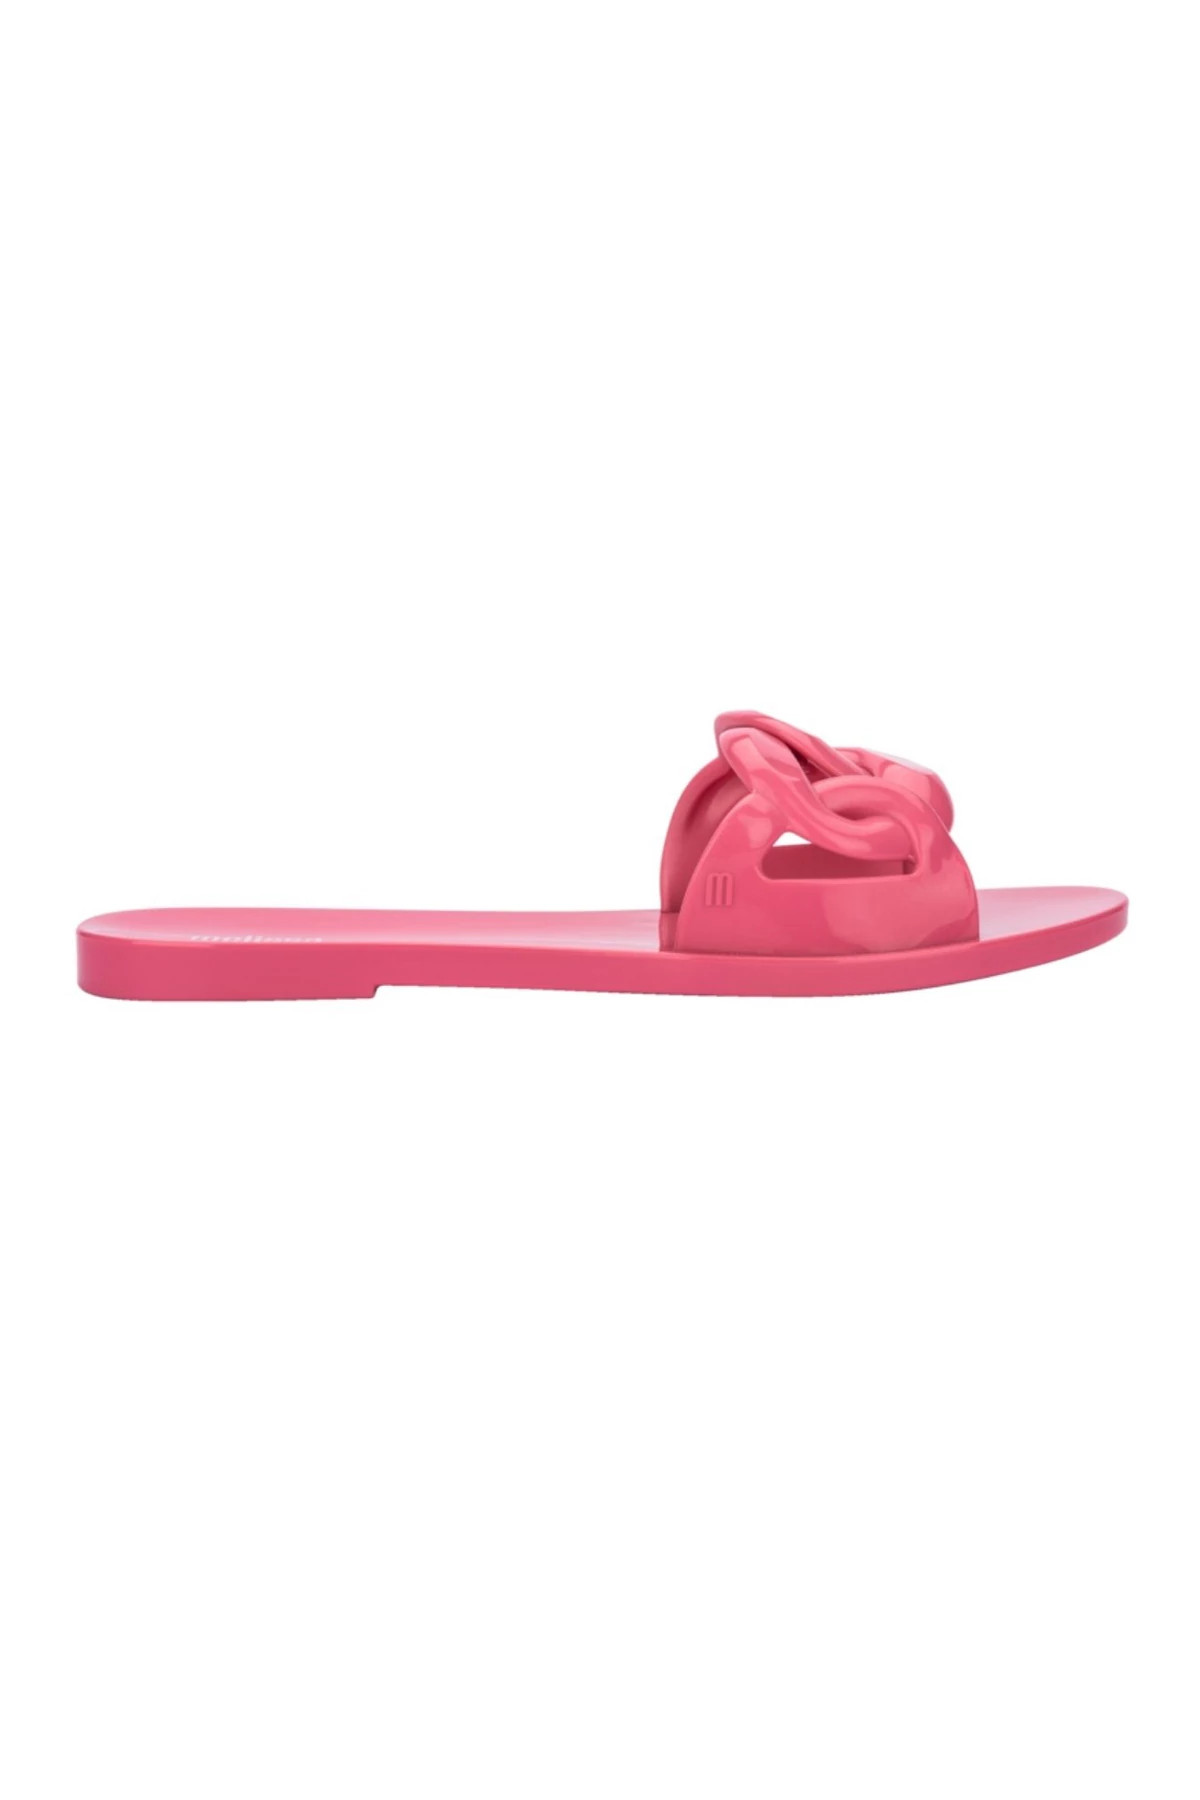 PINK Jelly Chain Slides image number 2